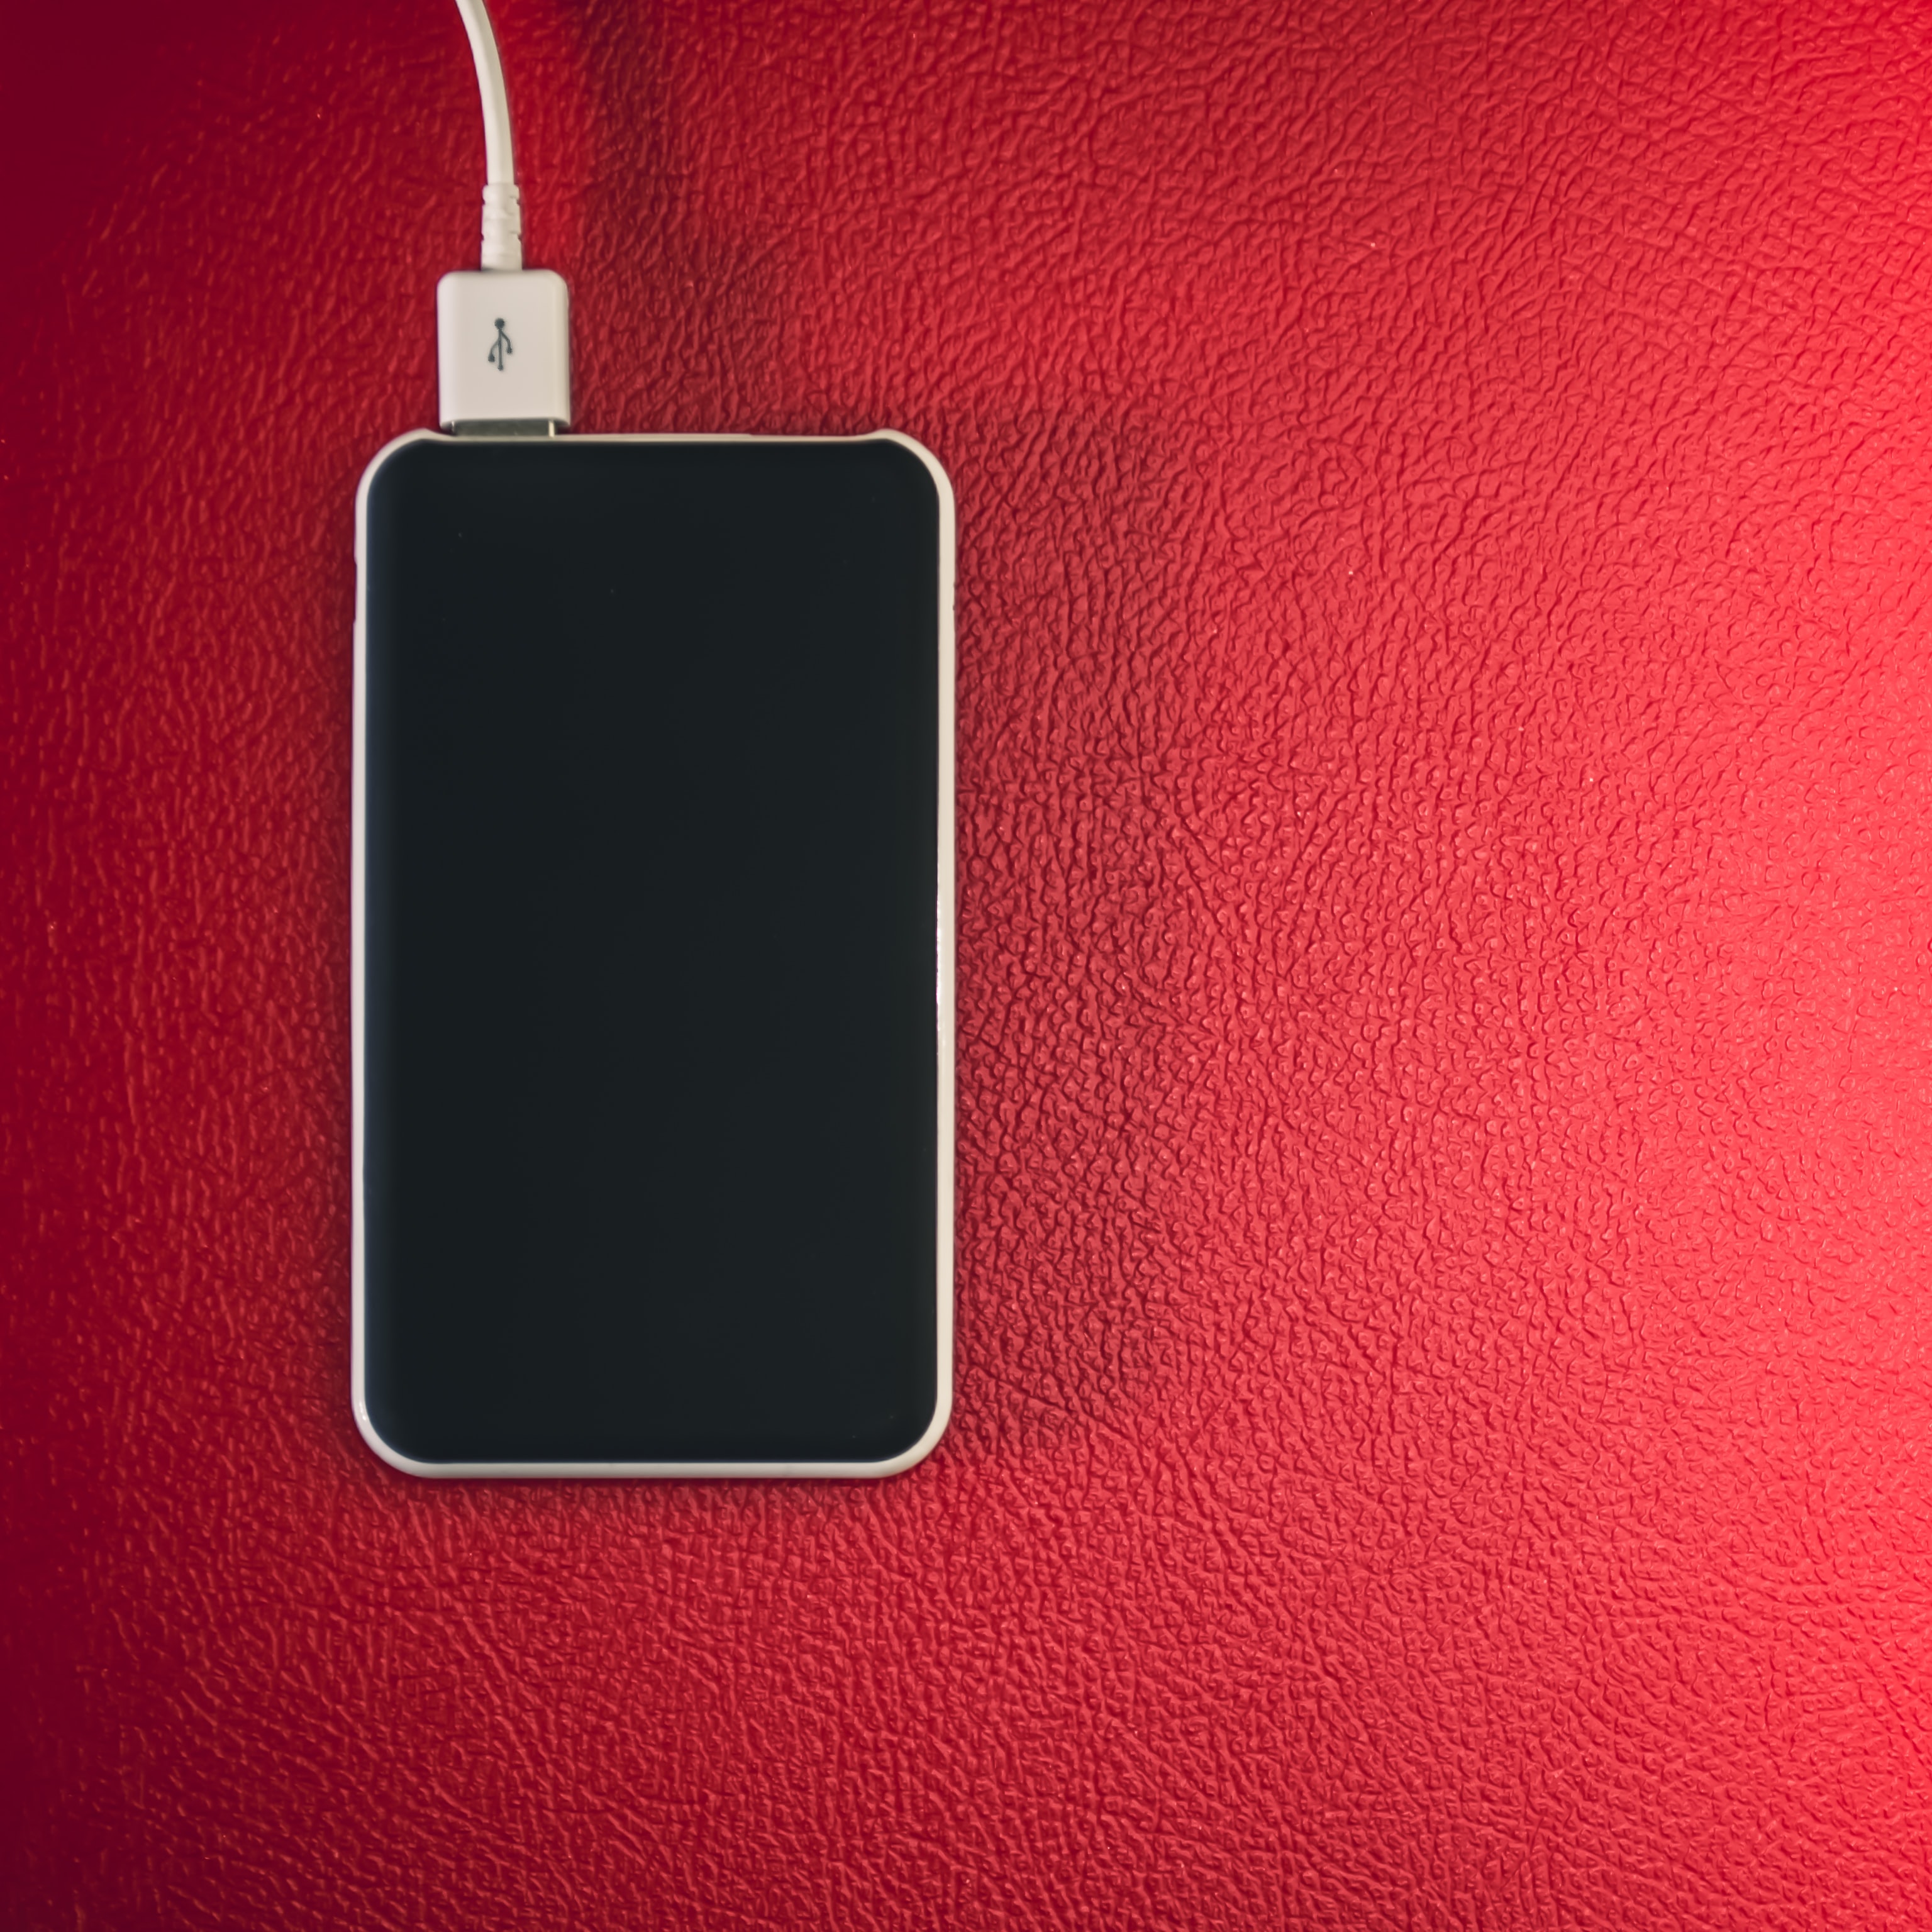 Phone charging with a red background